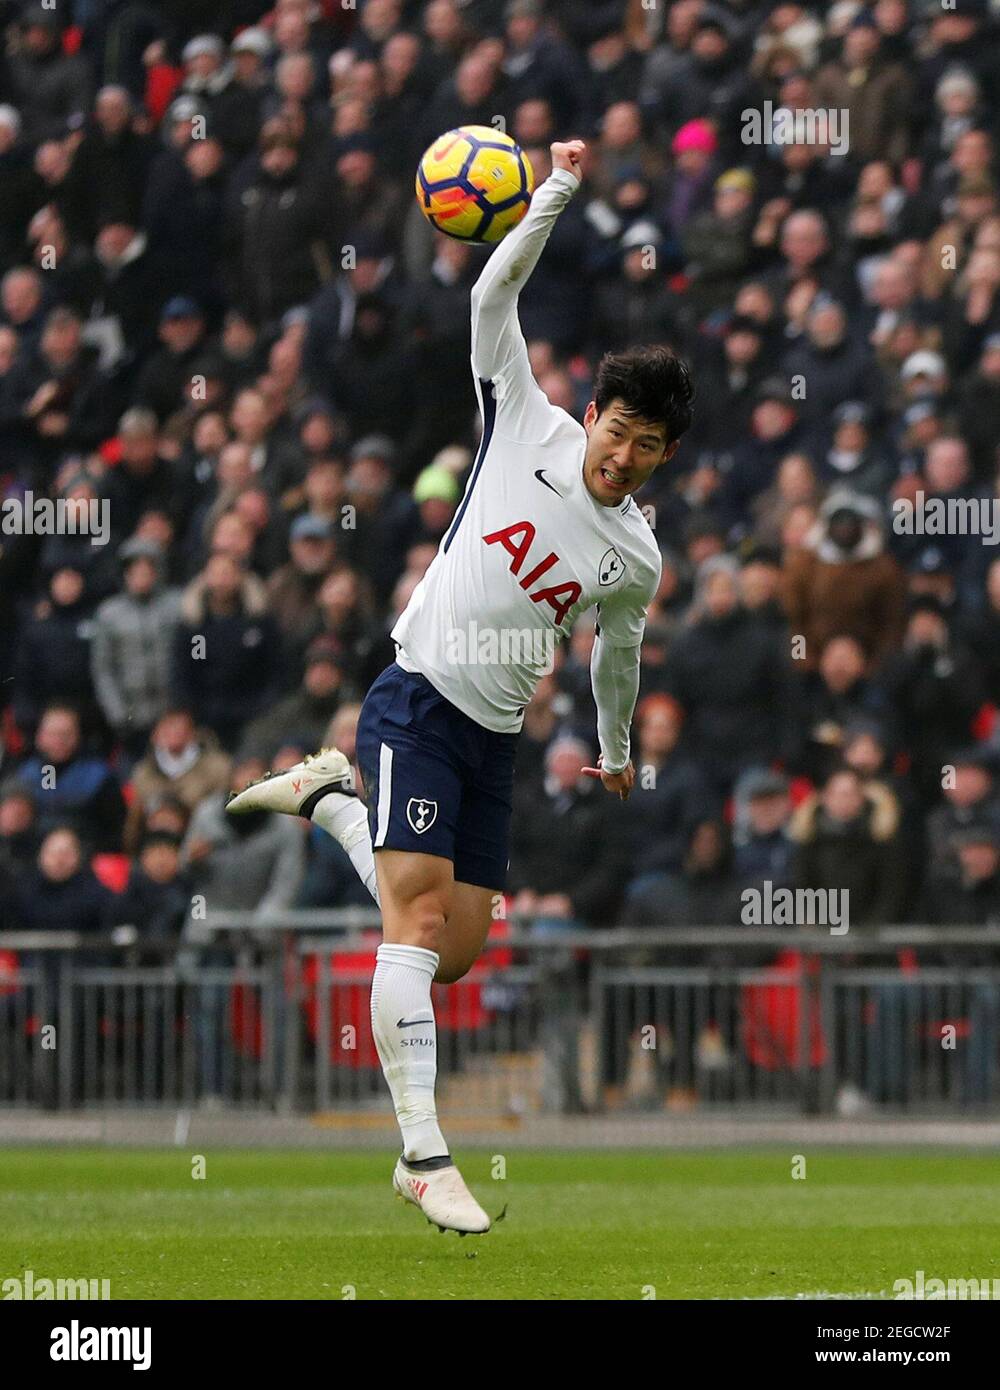 Soccer Football - Premier League - Tottenham Hotspur vs Huddersfield Town - Wembley Stadium, London, Britain - March 3, 2018   Tottenham's Son Heung-min scores their second goal    REUTERS/Eddie Keogh    EDITORIAL USE ONLY. No use with unauthorized audio, video, data, fixture lists, club/league logos or 'live' services. Online in-match use limited to 75 images, no video emulation. No use in betting, games or single club/league/player publications.  Please contact your account representative for further details. Stock Photo